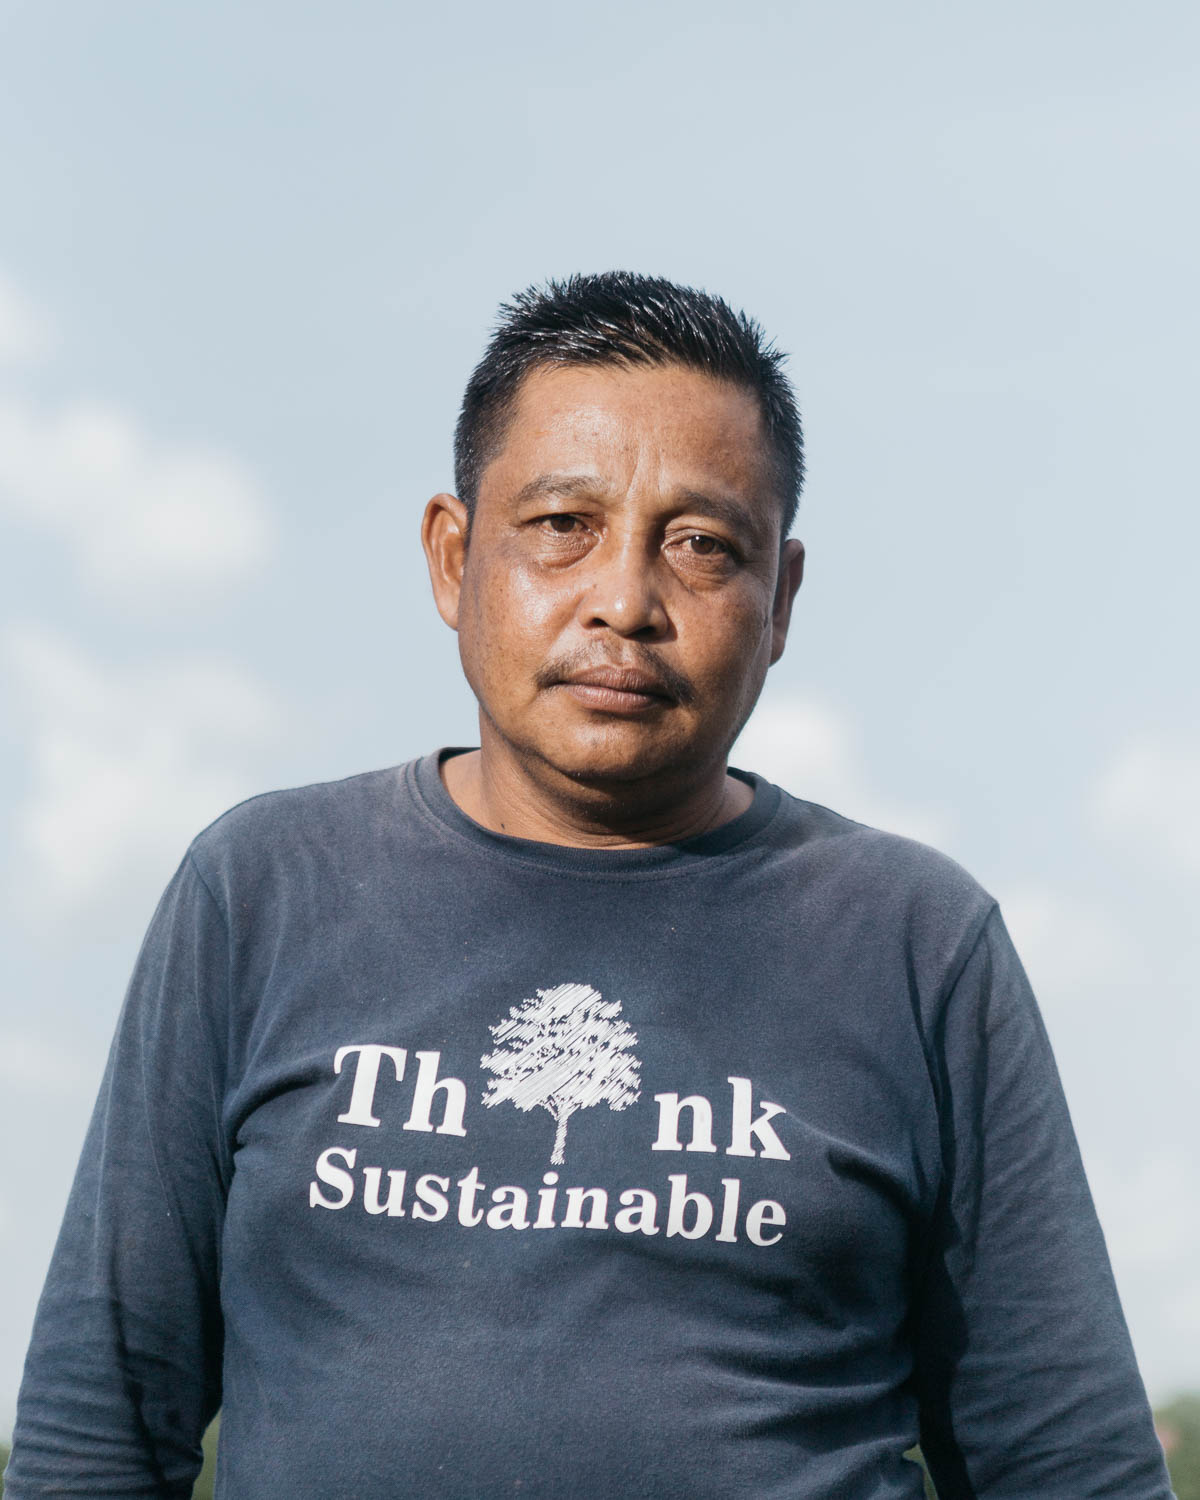  Portrait of Asdi, a villager who is benefited from Katingan Mentaya Project initiated by PT Rimba Makmur Utama. In the past he used to pratice slash and burn method for land clearing and also involved in illegal logging. He later joined the project 